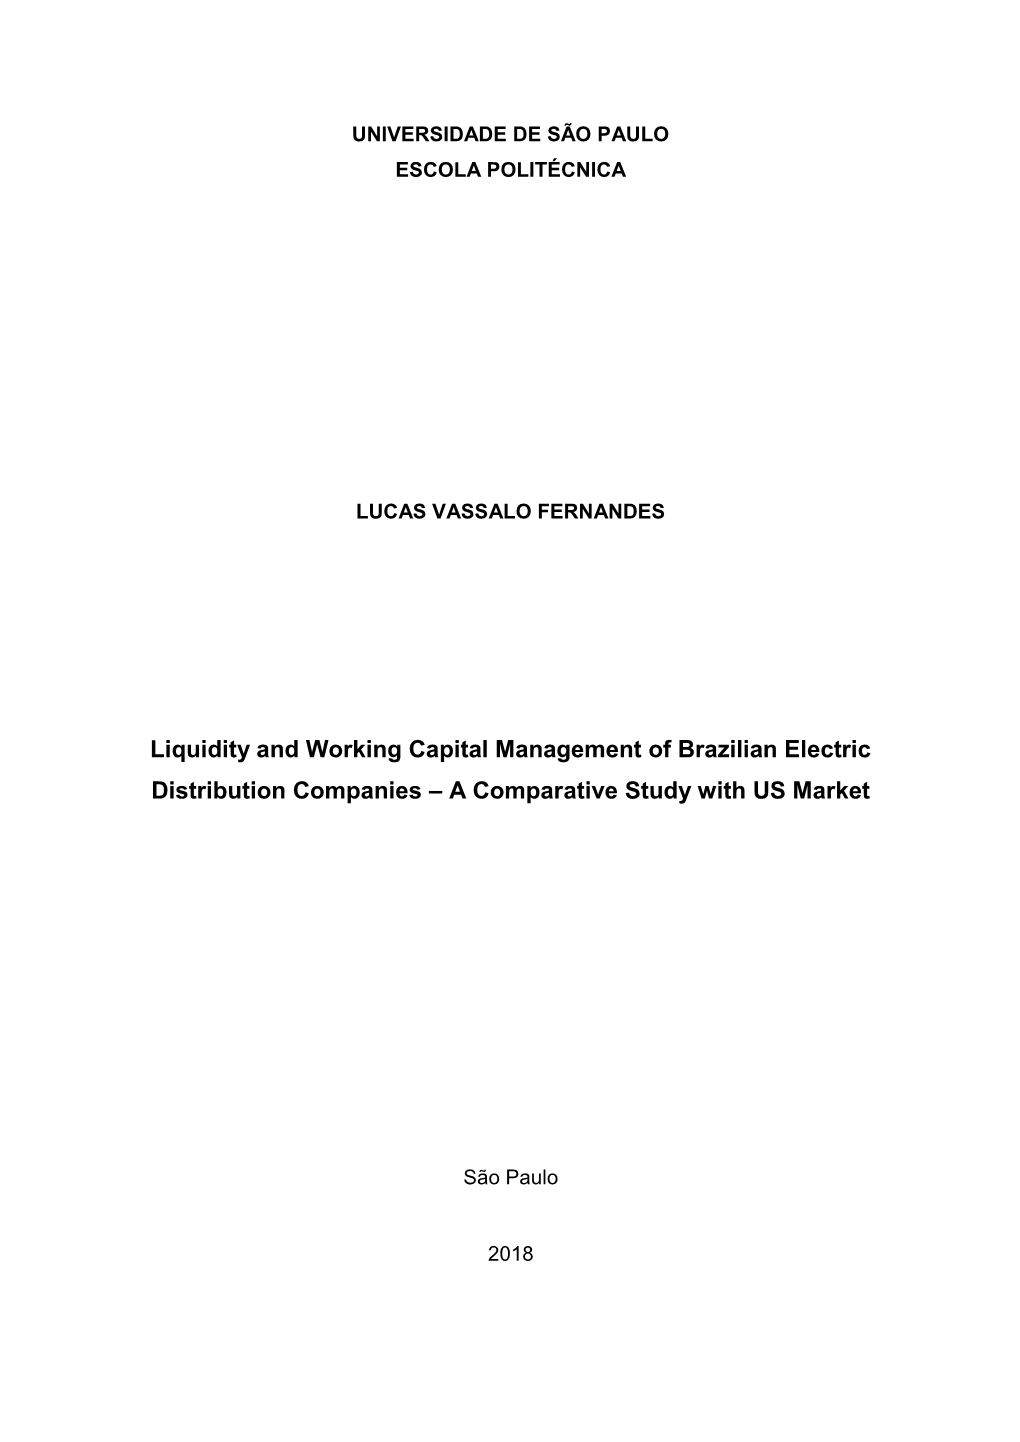 Liquidity and Working Capital Management of Brazilian Electric Distribution Companies – a Comparative Study with US Market